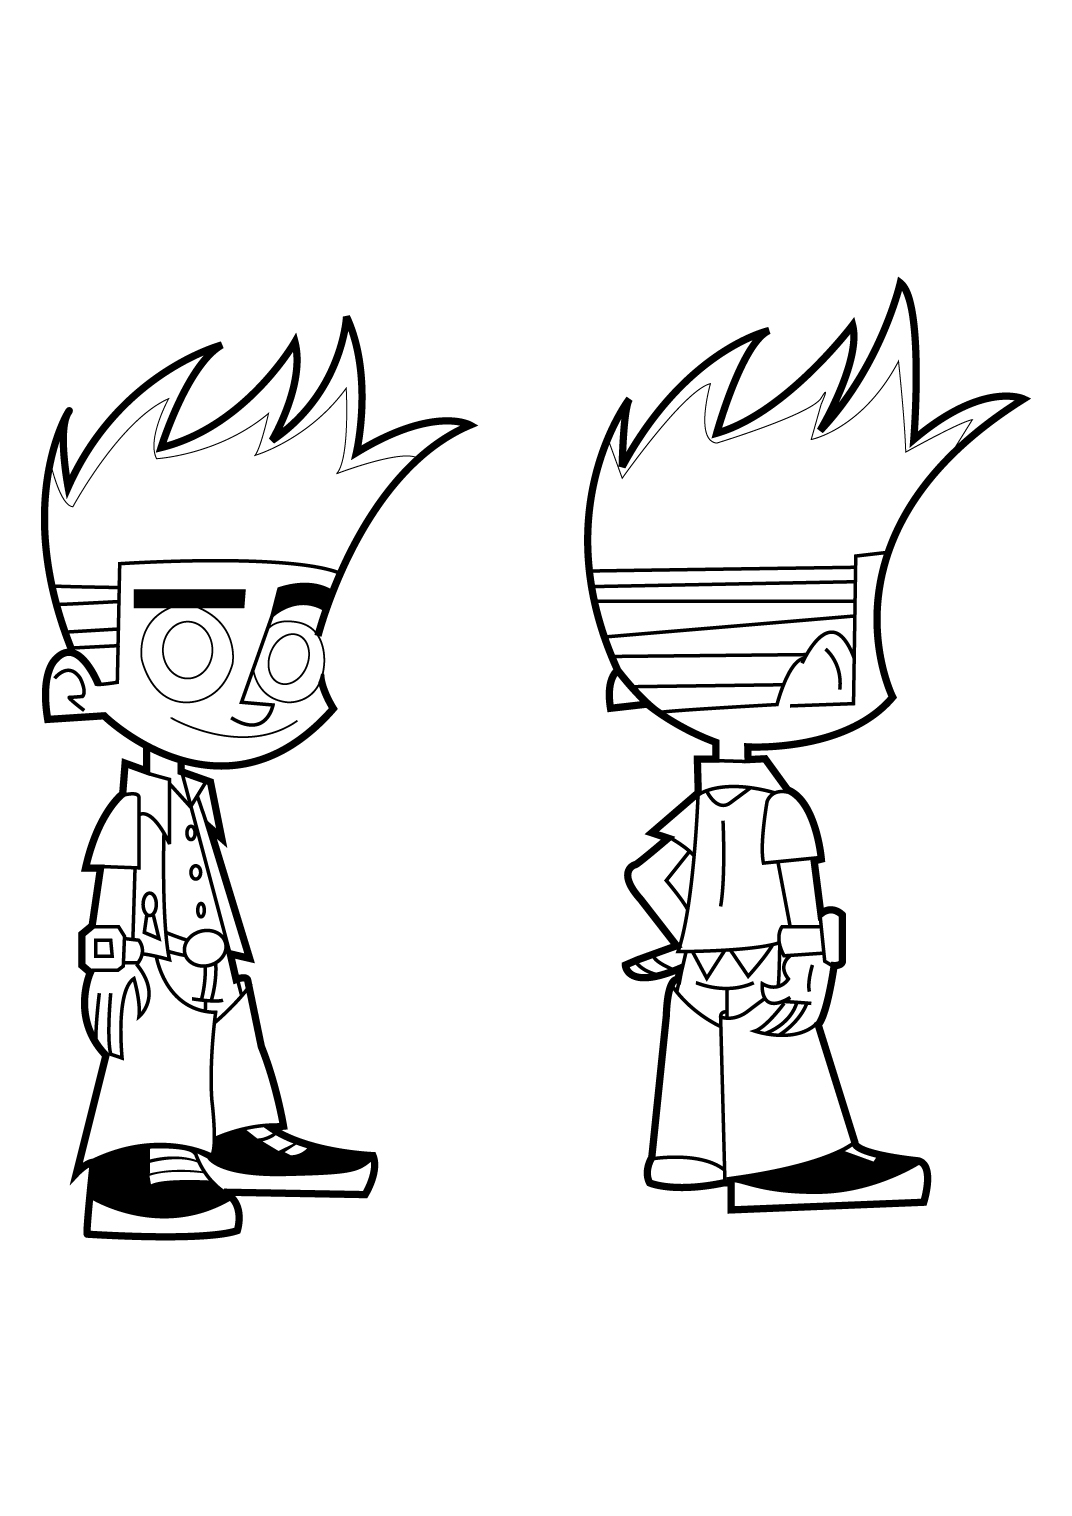  Free Johnny Test coloring pages | letscoloringpages.com | Johnny test